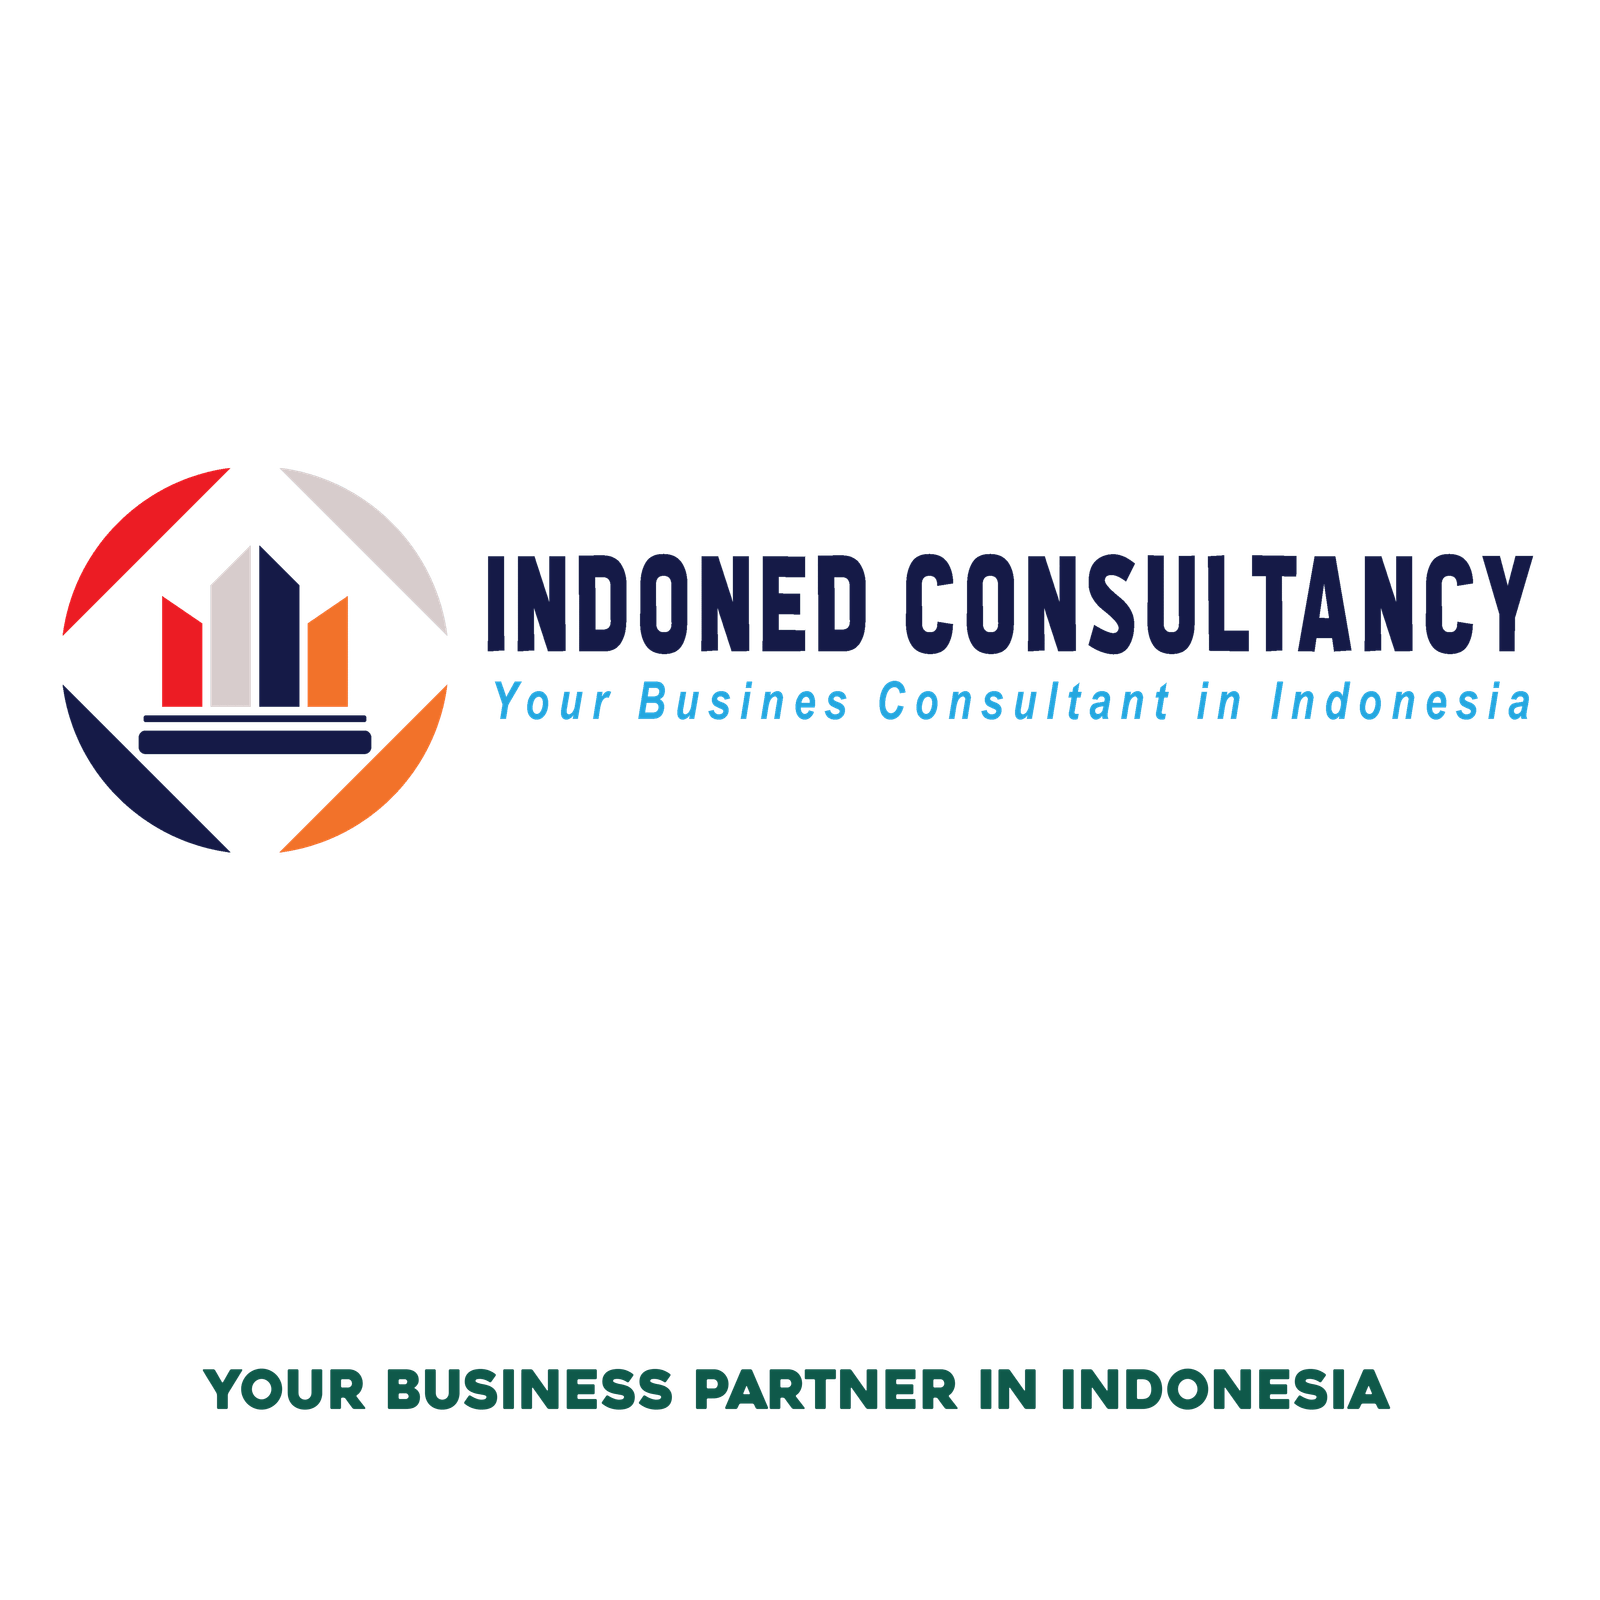  Indoned